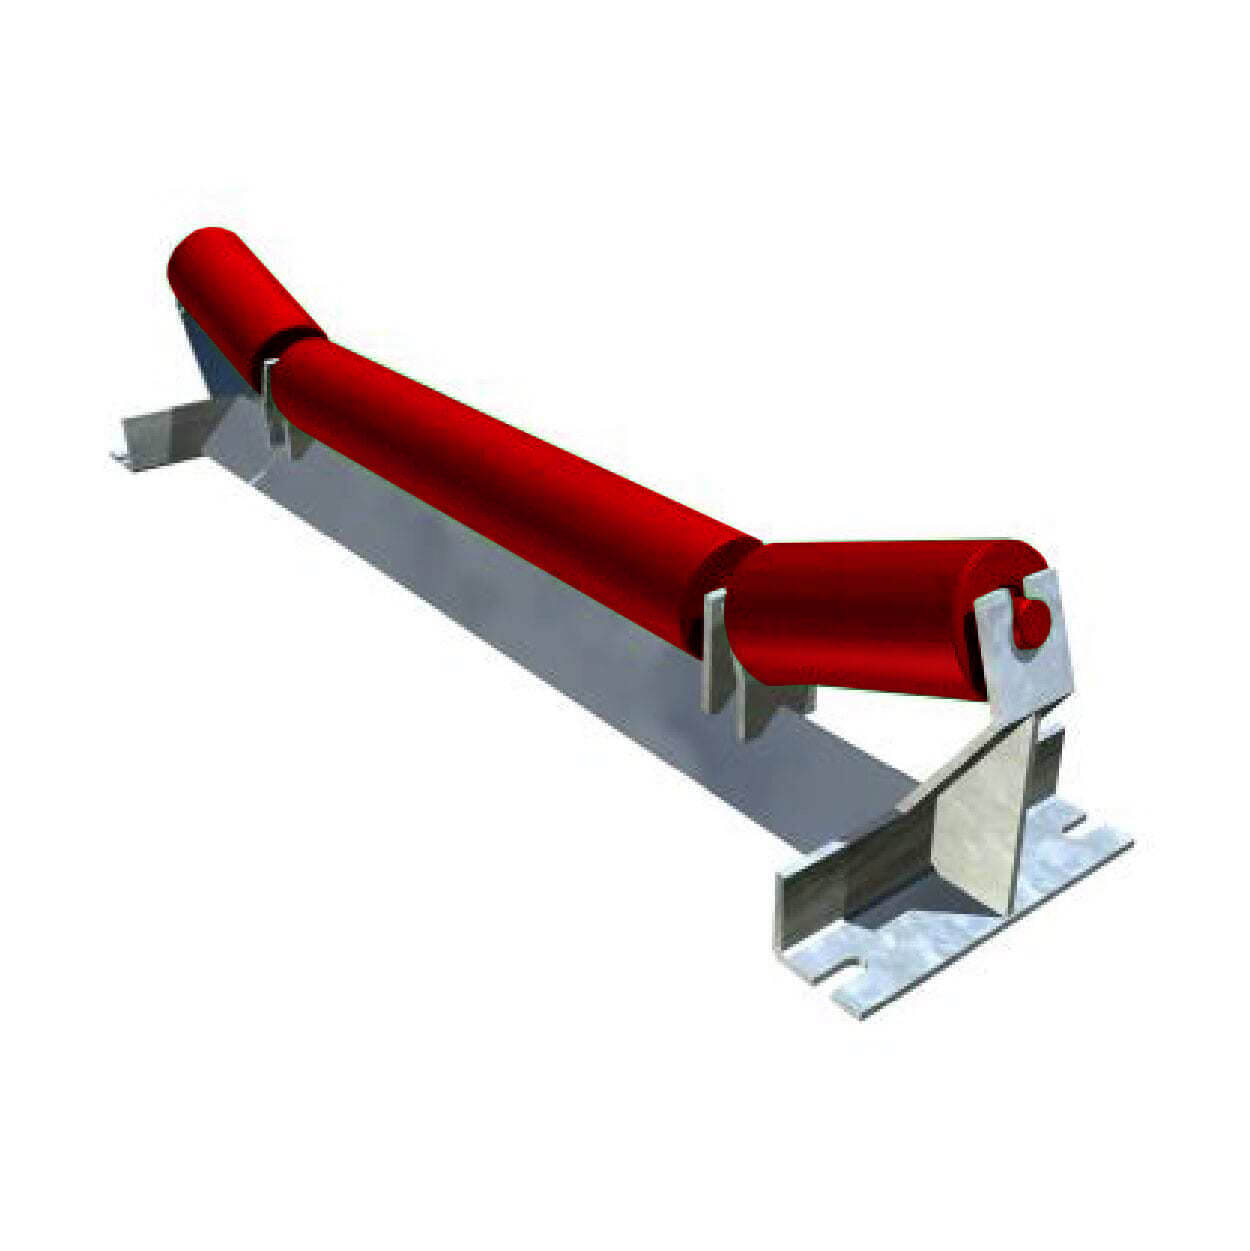 A red cylindrical conveyor belt roller with a metal support frame, enhanced by troughing idlers for improved material handling.